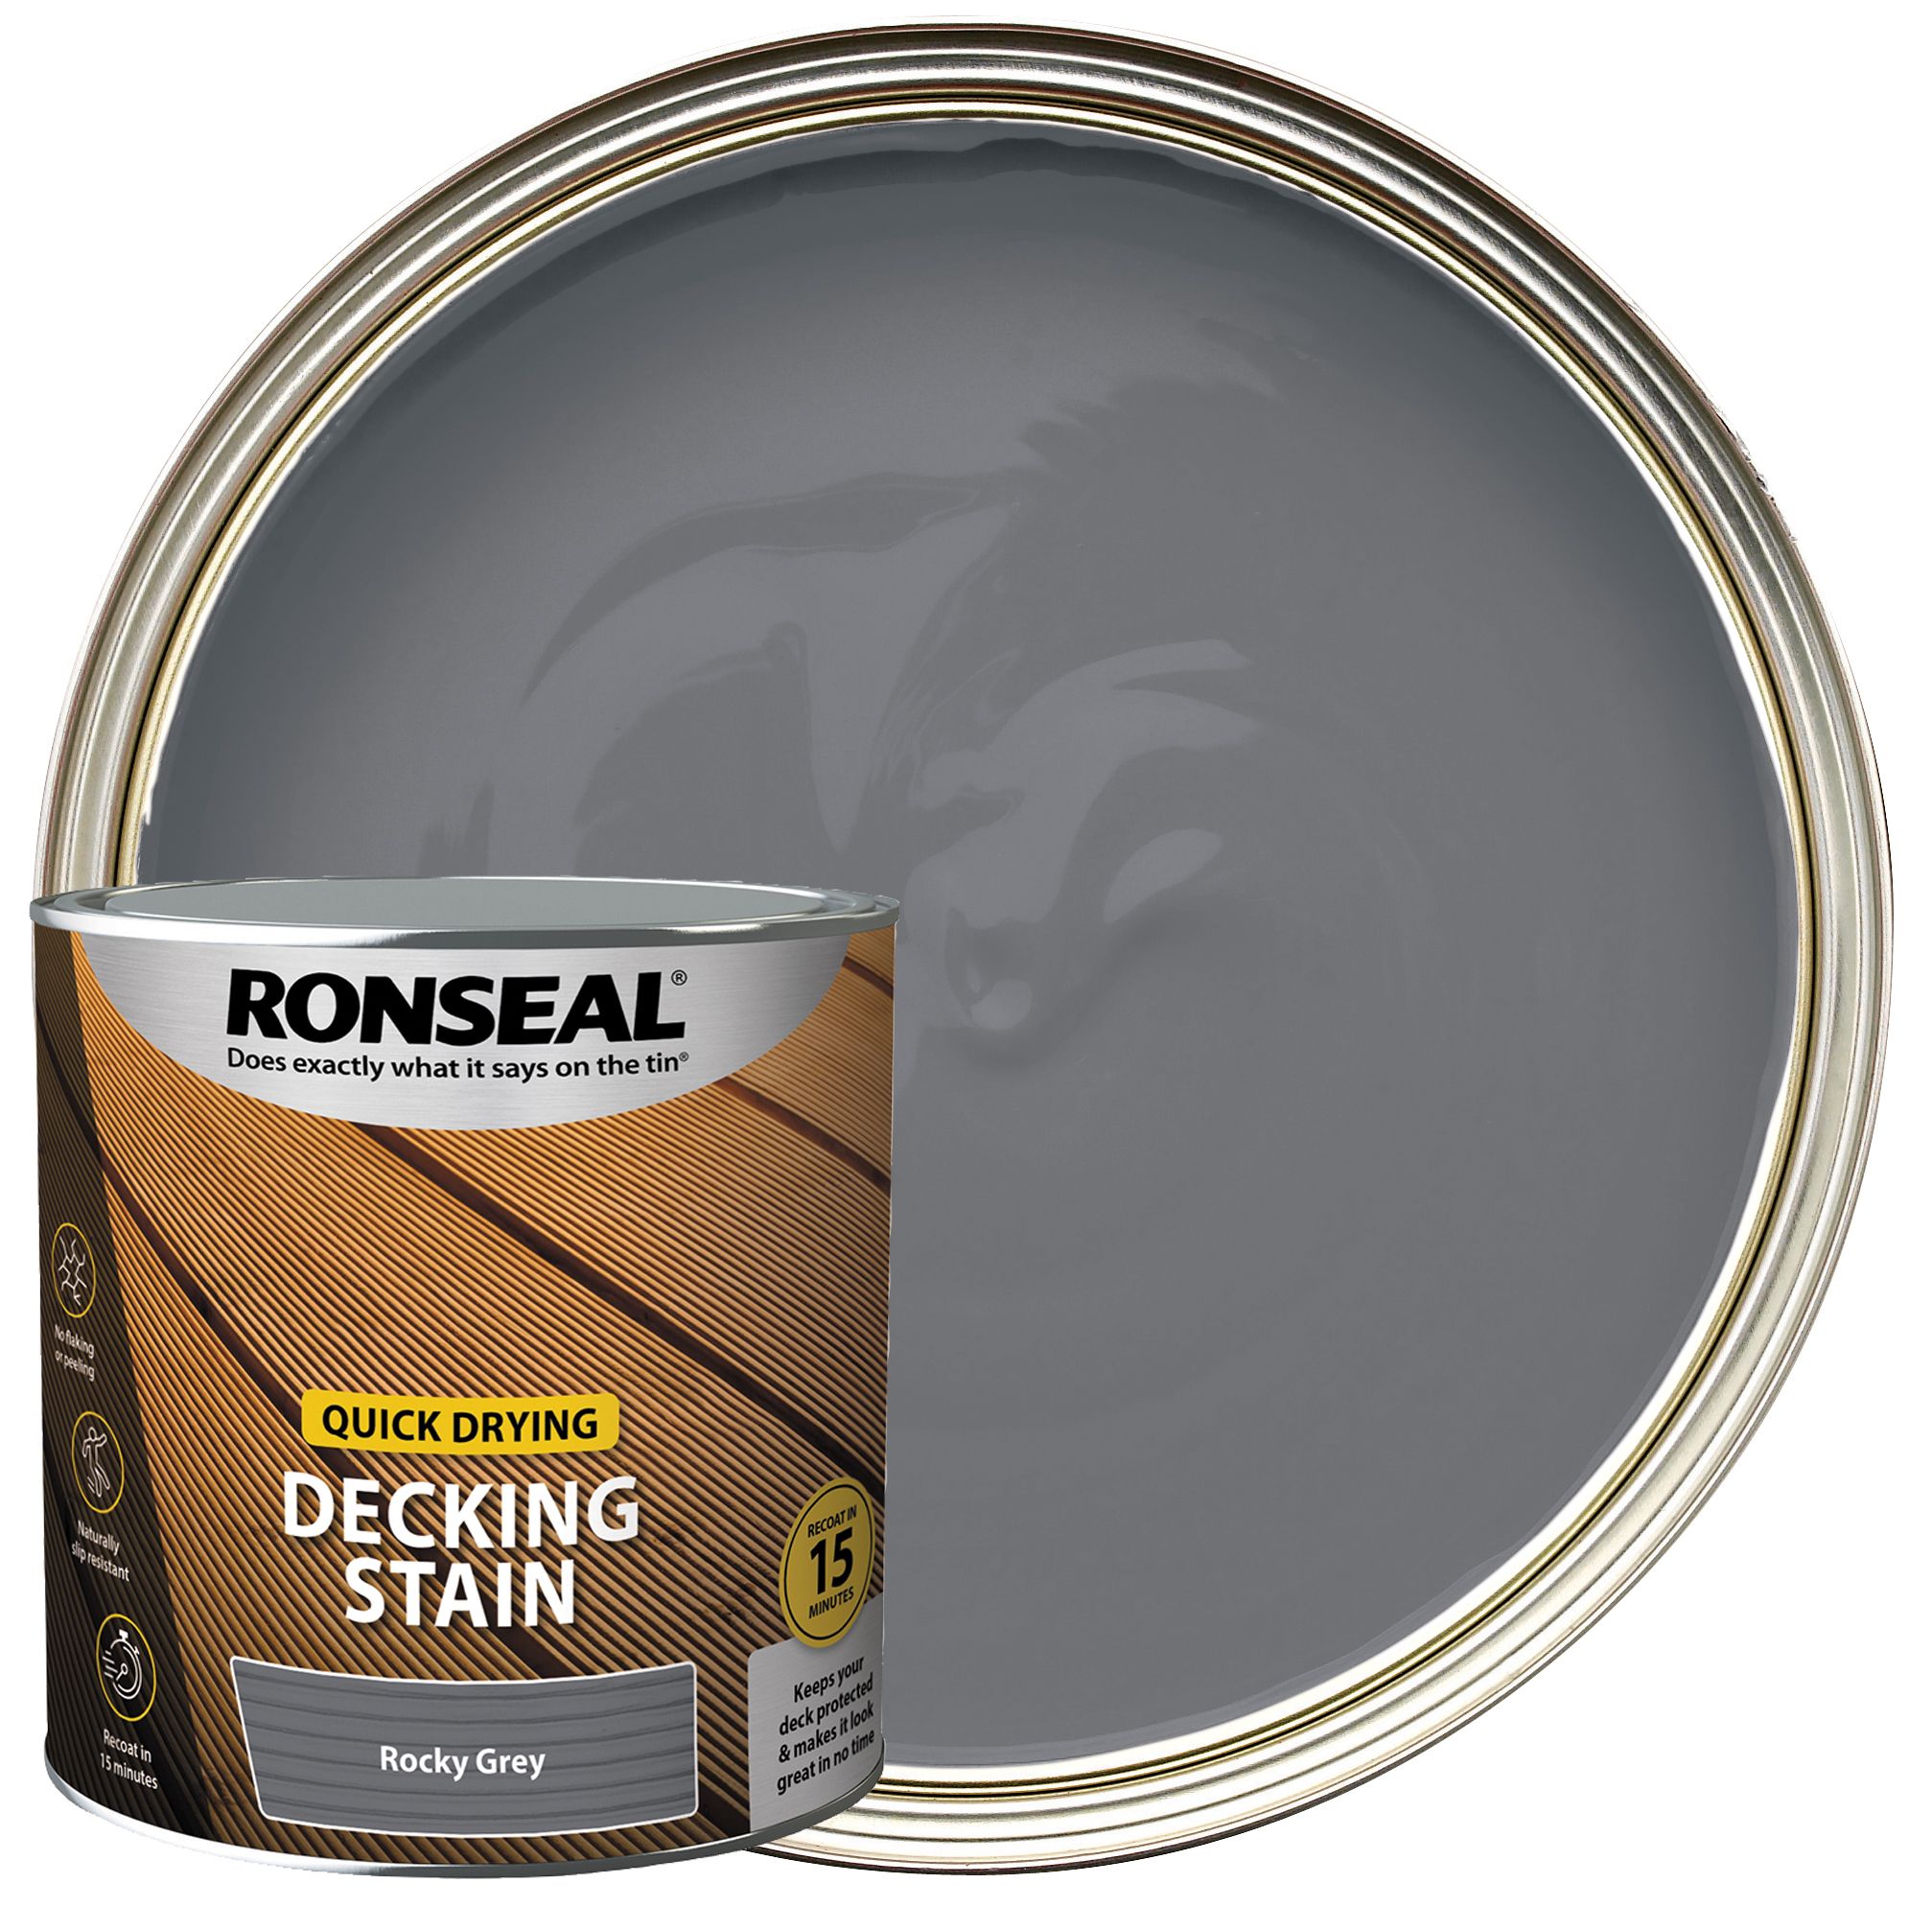 Image of Ronseal Rocky Grey Quick Drying Decking Stain - 2.5L